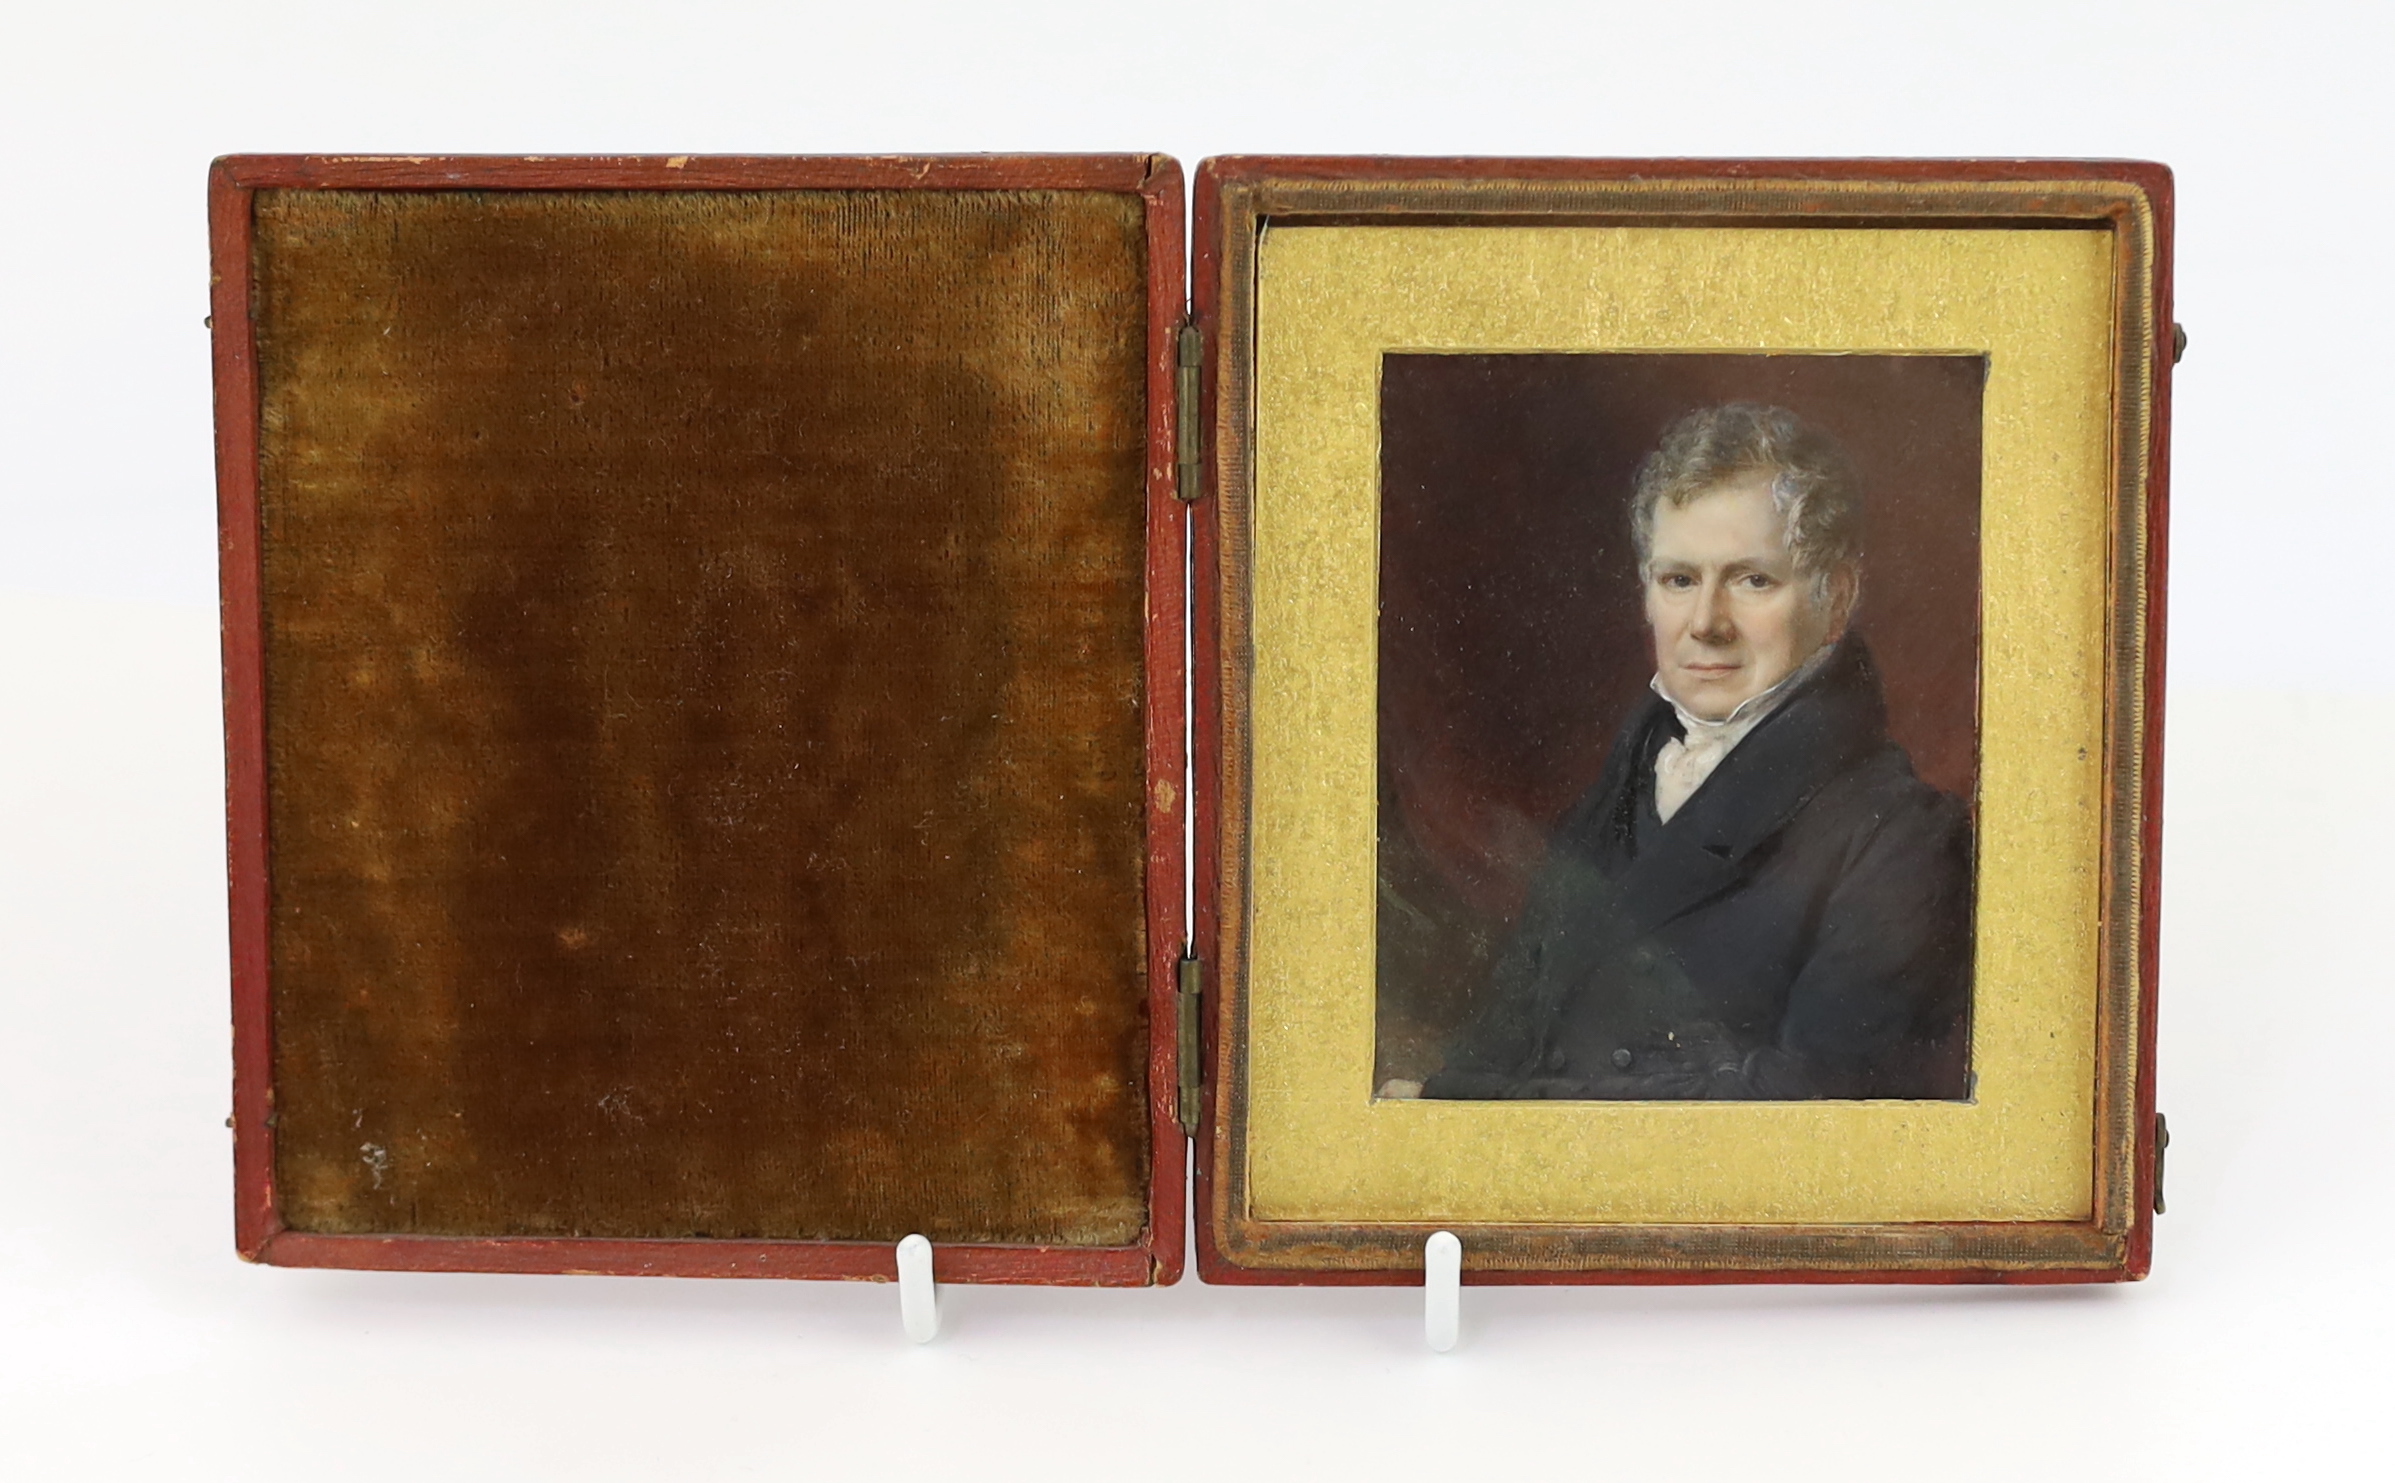 John Jackson (English, 1778-1831), Portrait miniature of a gentleman, watercolour on ivory, 8 x 6.5cm. CITES Submission reference 5YQW6TKN